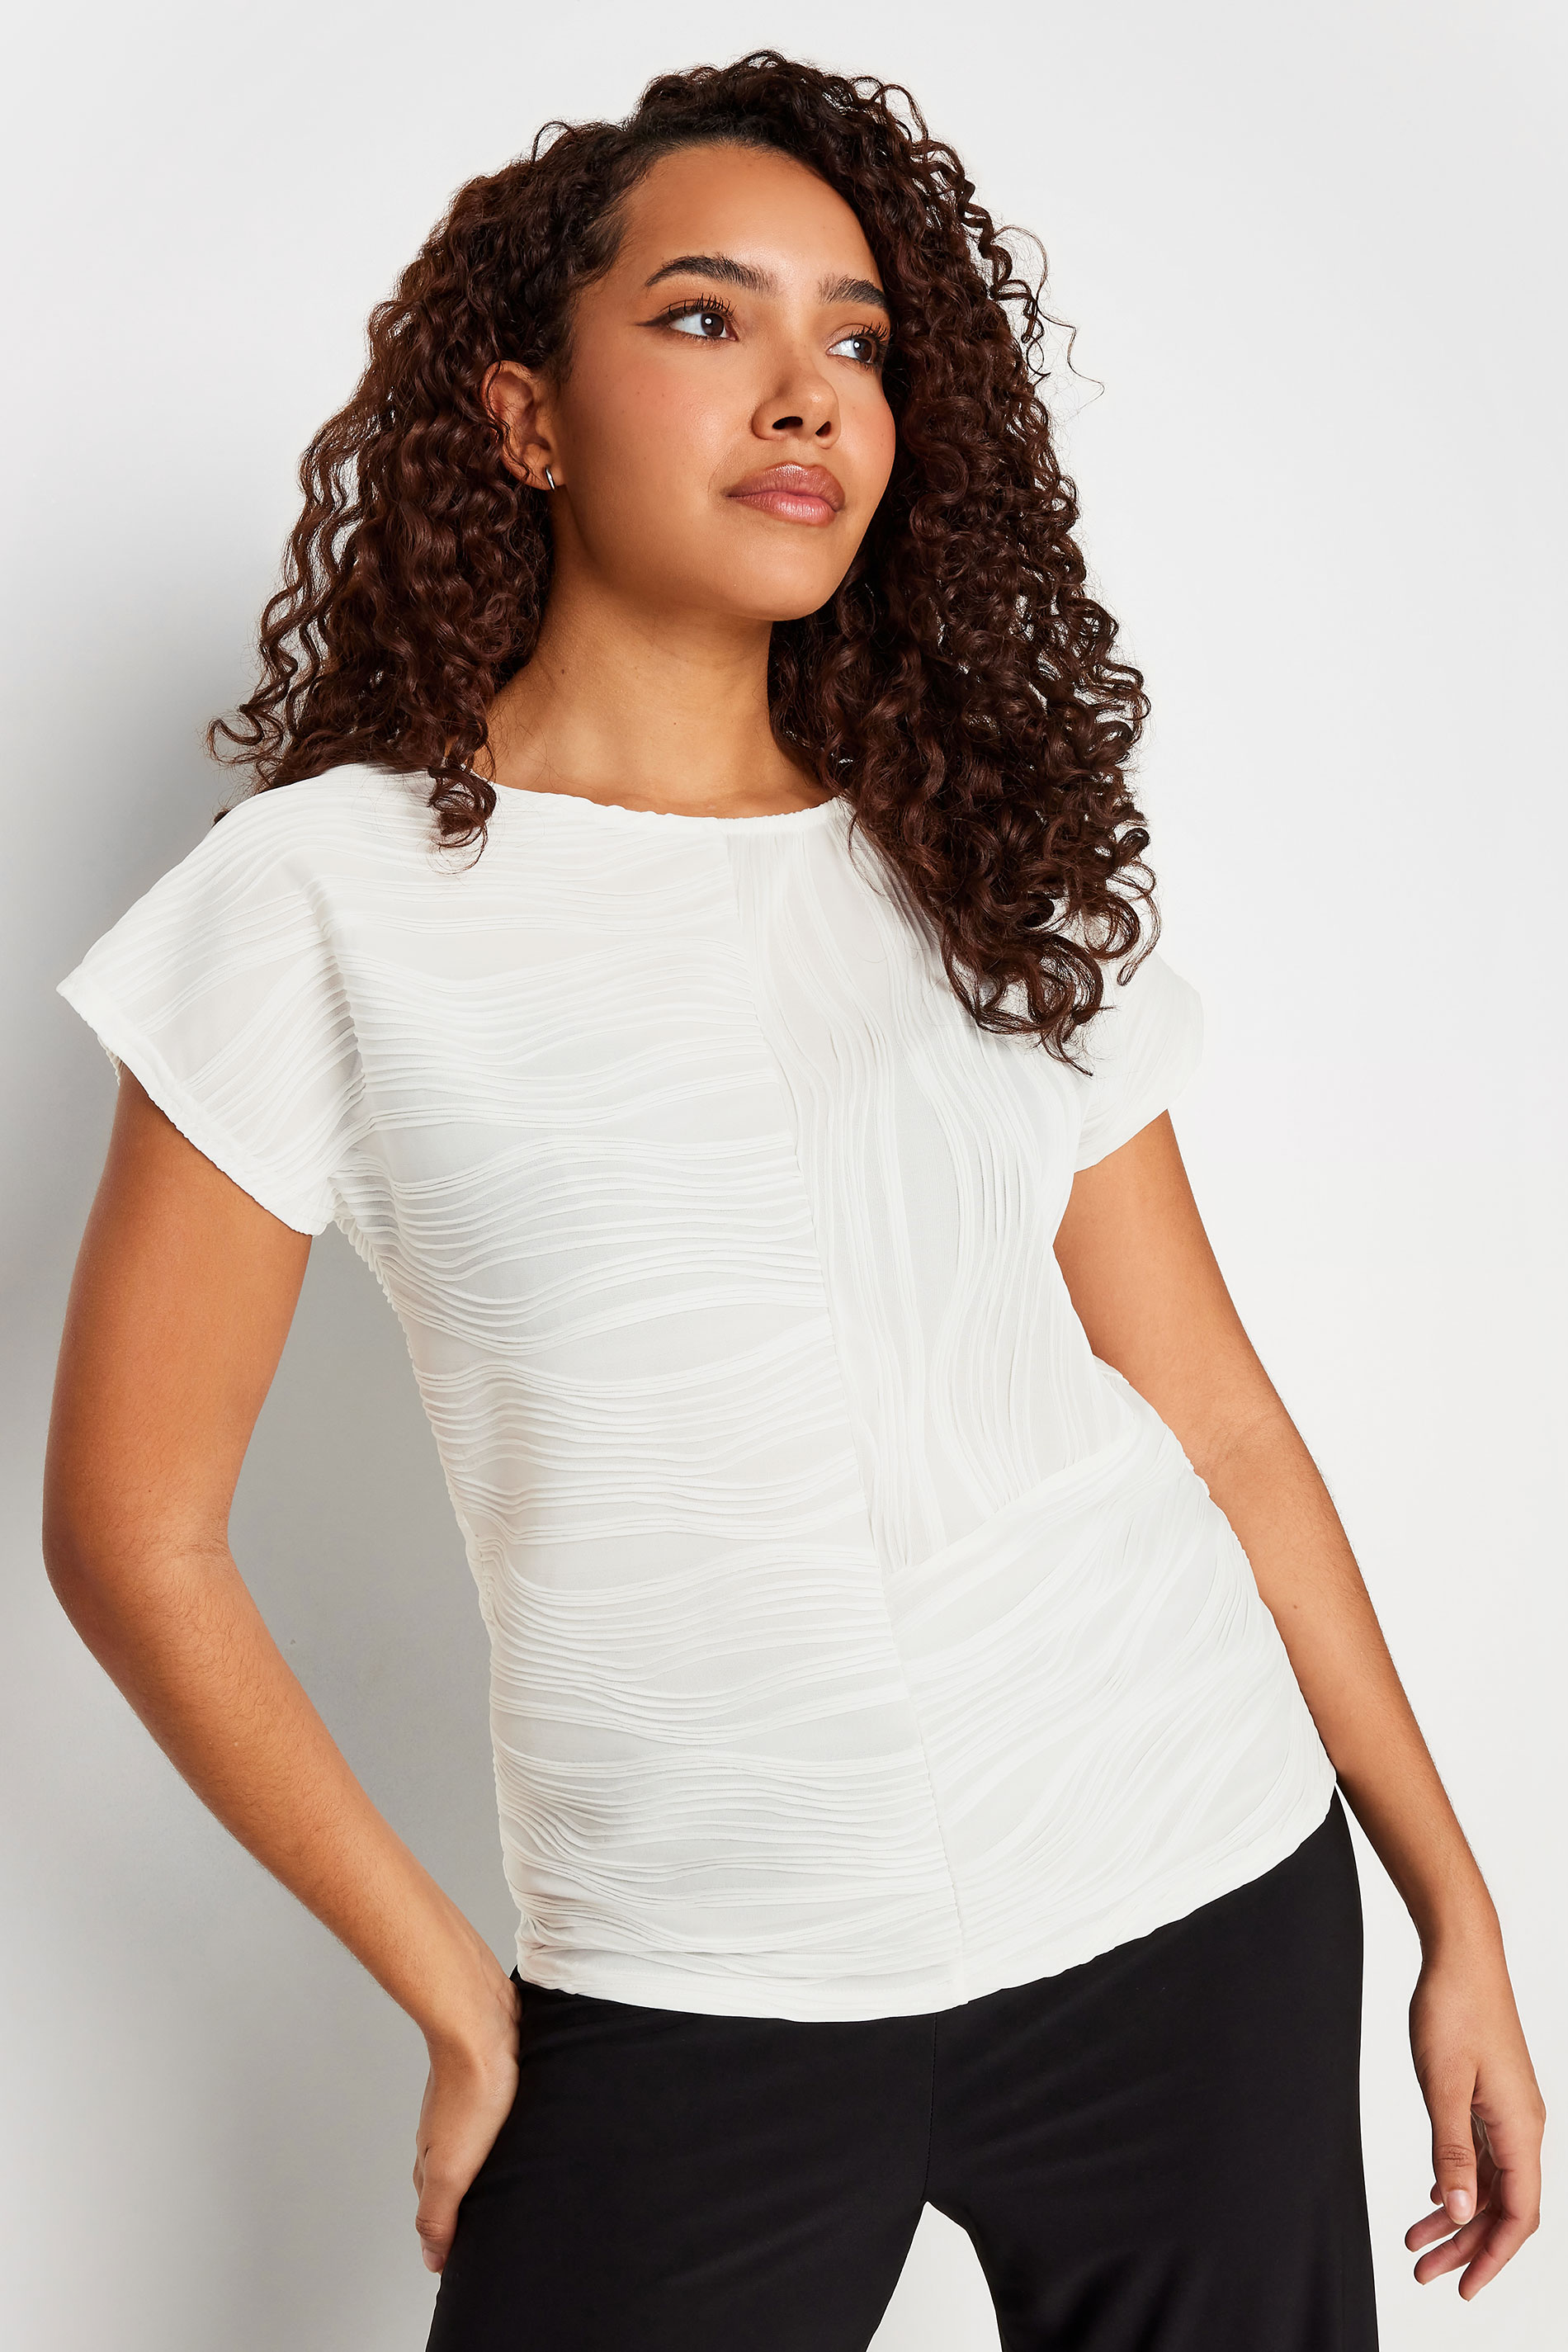 M&Co Ivory White Textured Top | M&Co 1